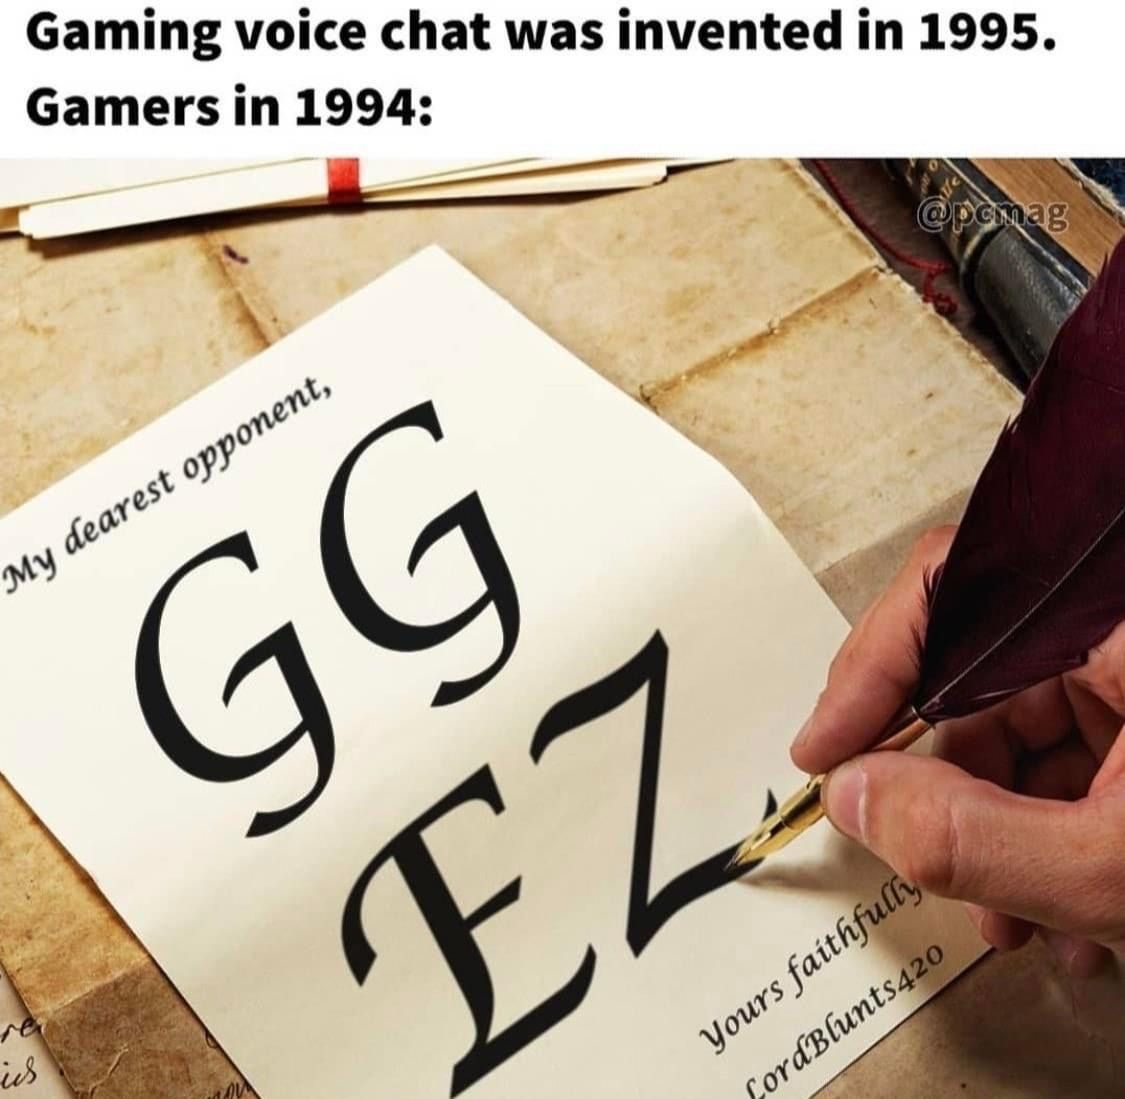 funny gaming memes - gaming voice chat was invented in 1995 - Gaming voice chat was invented in 1995. Gamers in 1994 My dearest opponent, Gg Ez ich Yours faithfully LordBlunts420